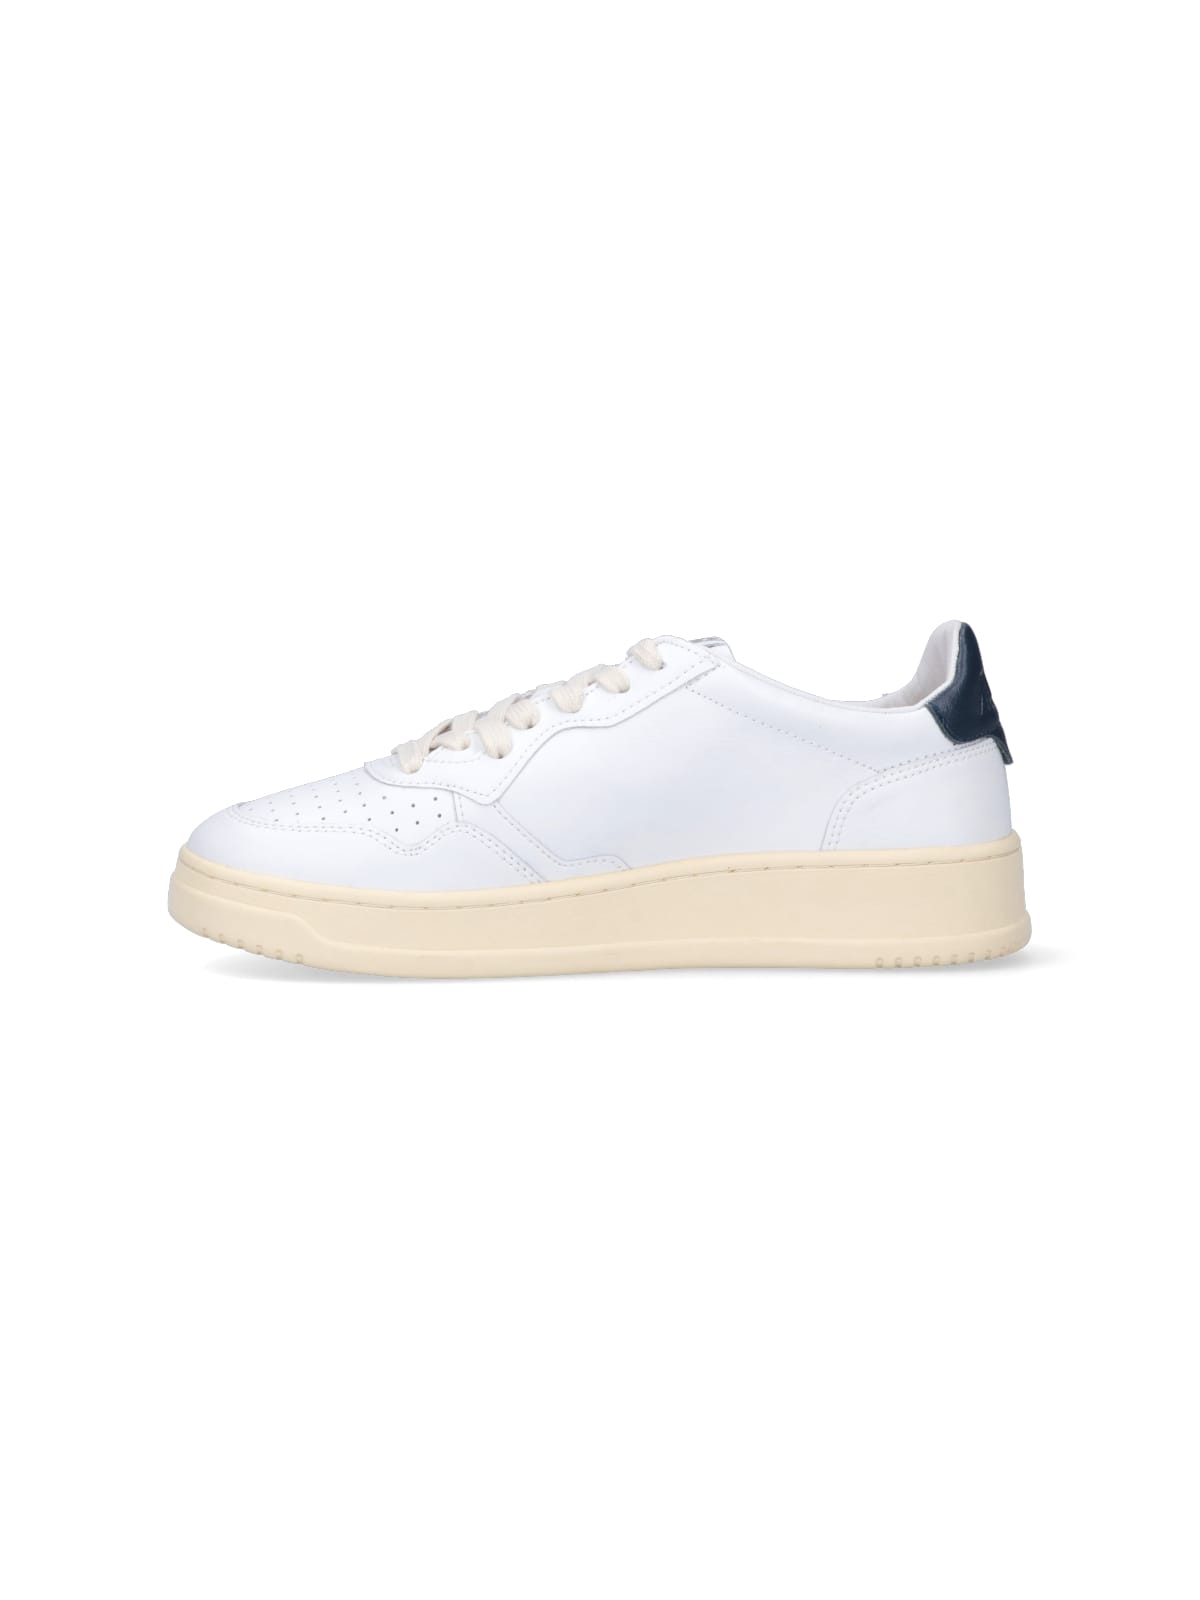 Shop Autry Low Sneakers Medalist In Wht/space